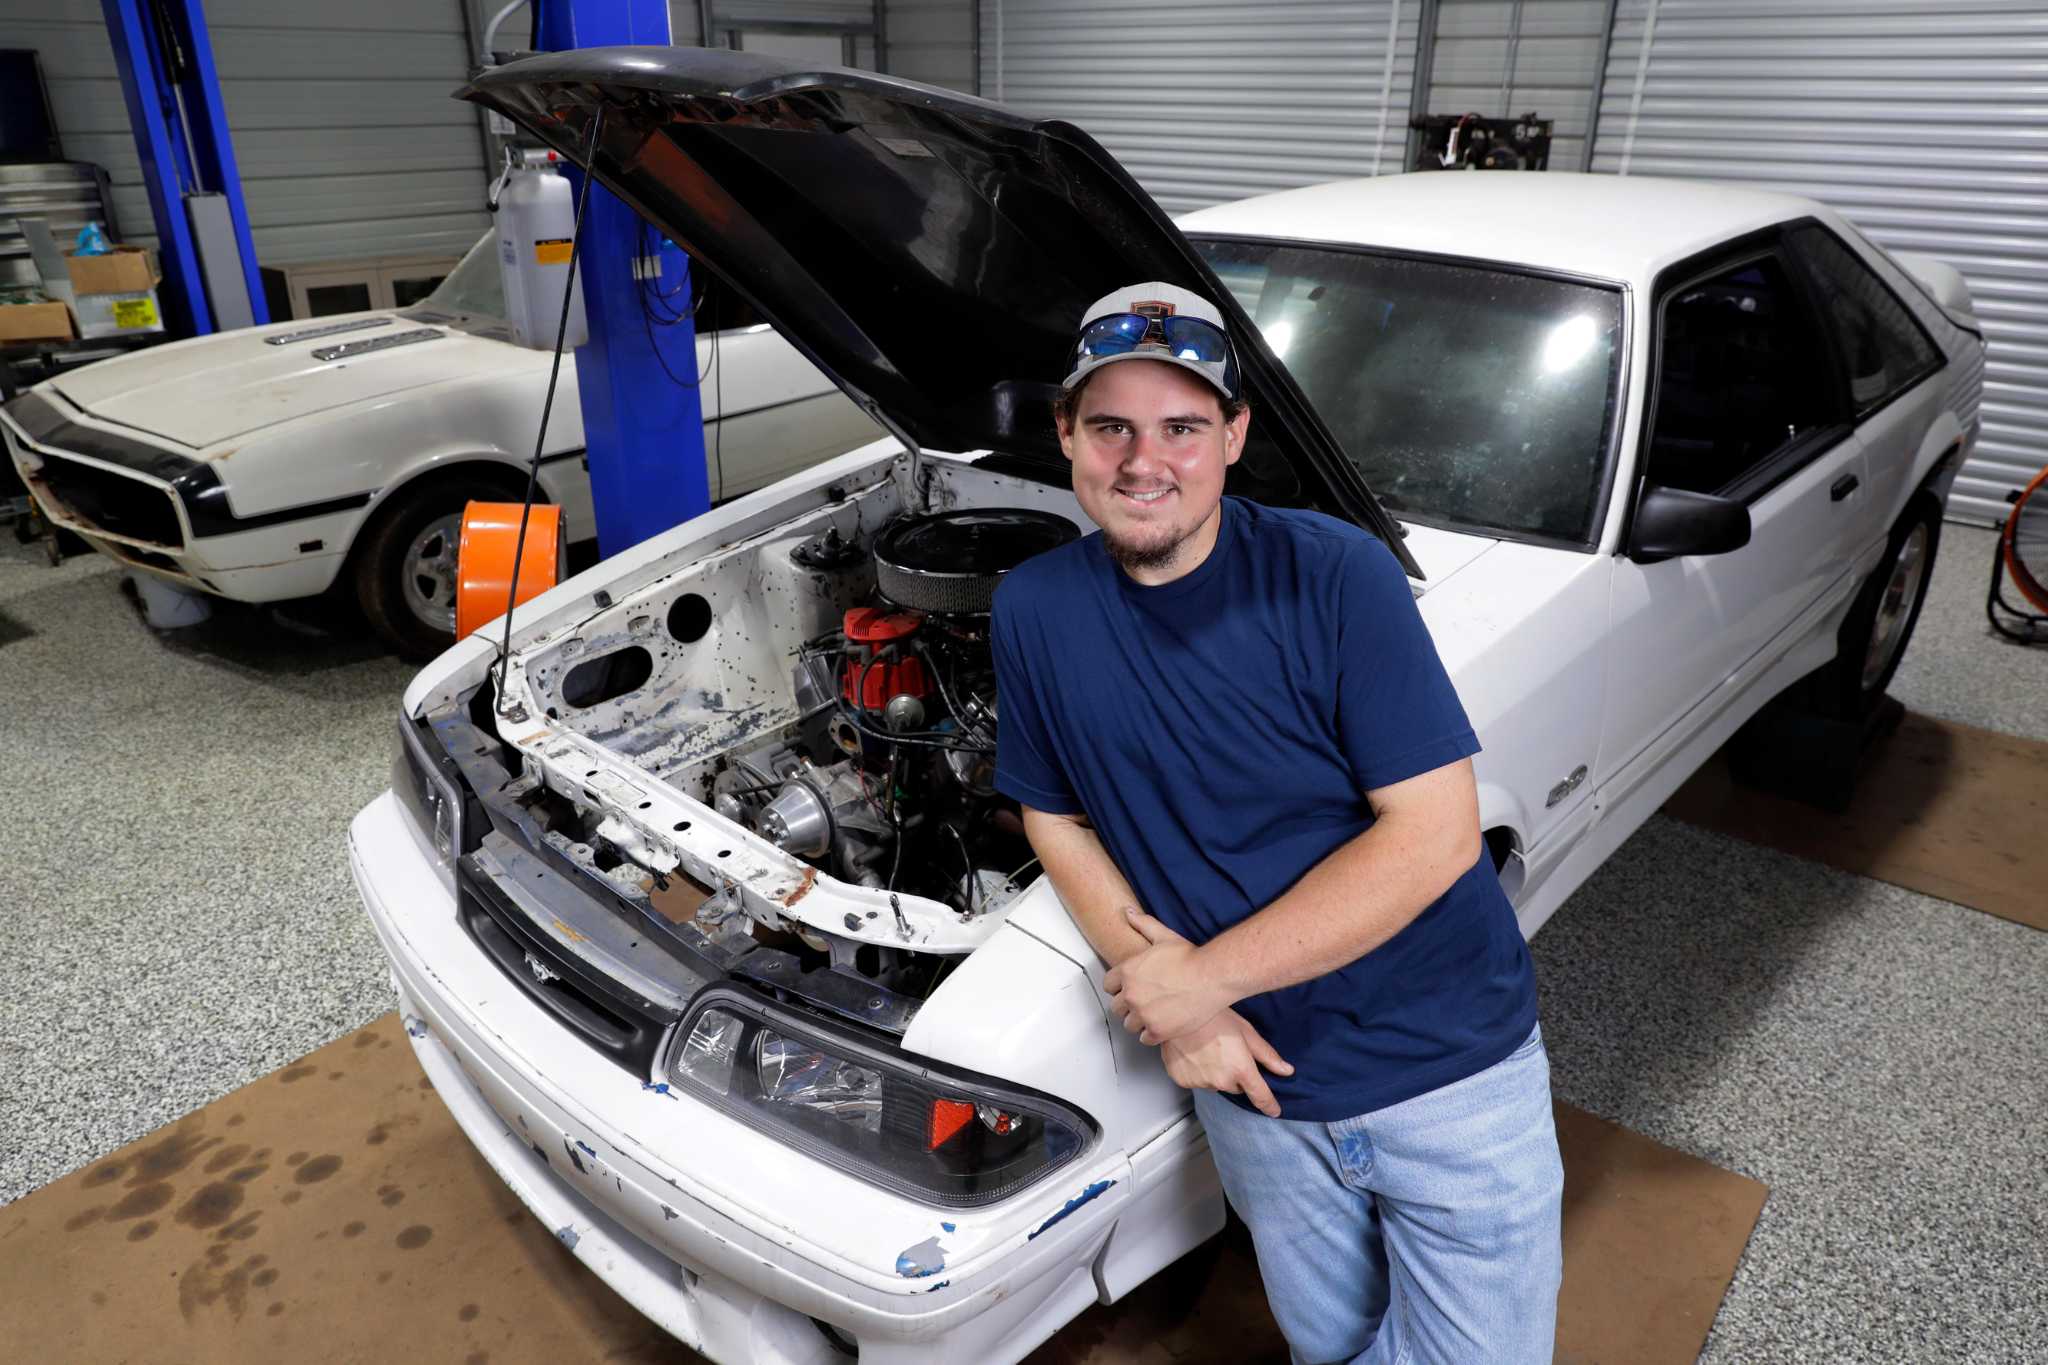 Texas man could not slot in his automotive, so he started engaged on himself